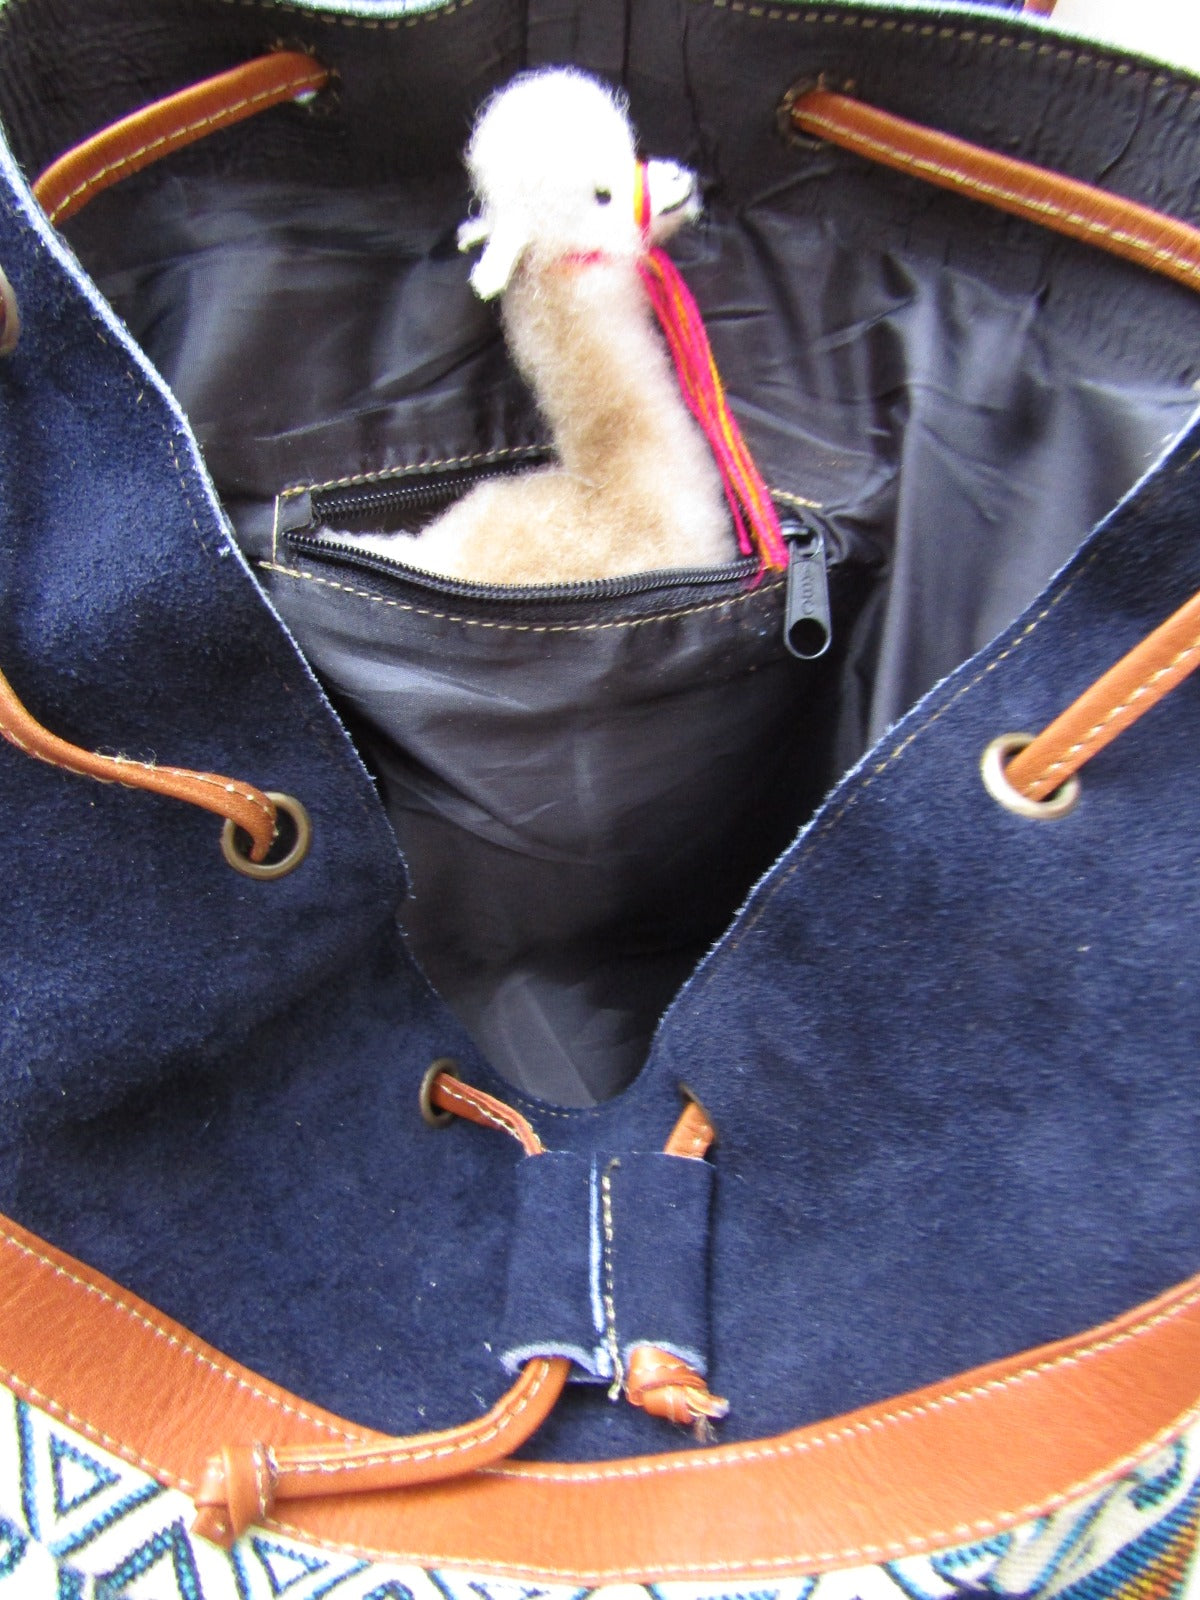 Backpack With Suede Leather/Ethnic Andean Handmade Genuine Leather Aguayo / Uniquely Designed For Individual Distinction